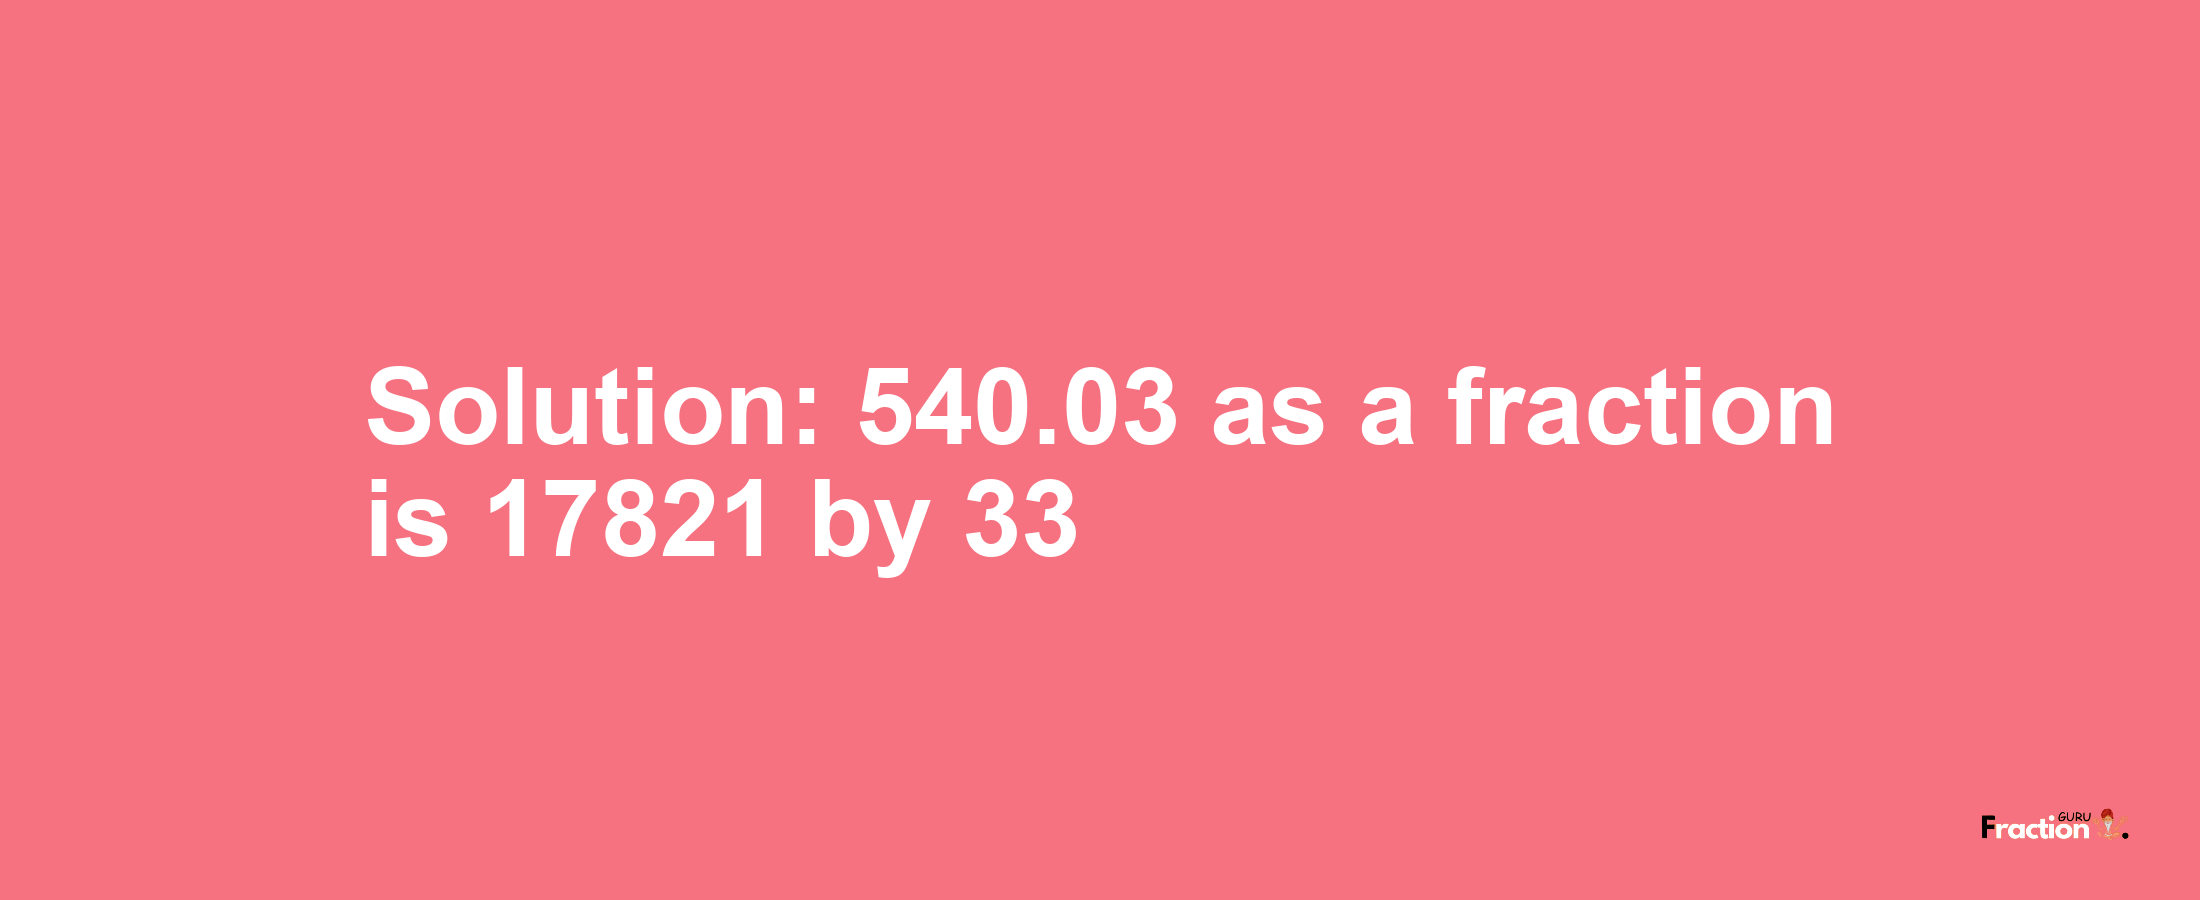 Solution:540.03 as a fraction is 17821/33